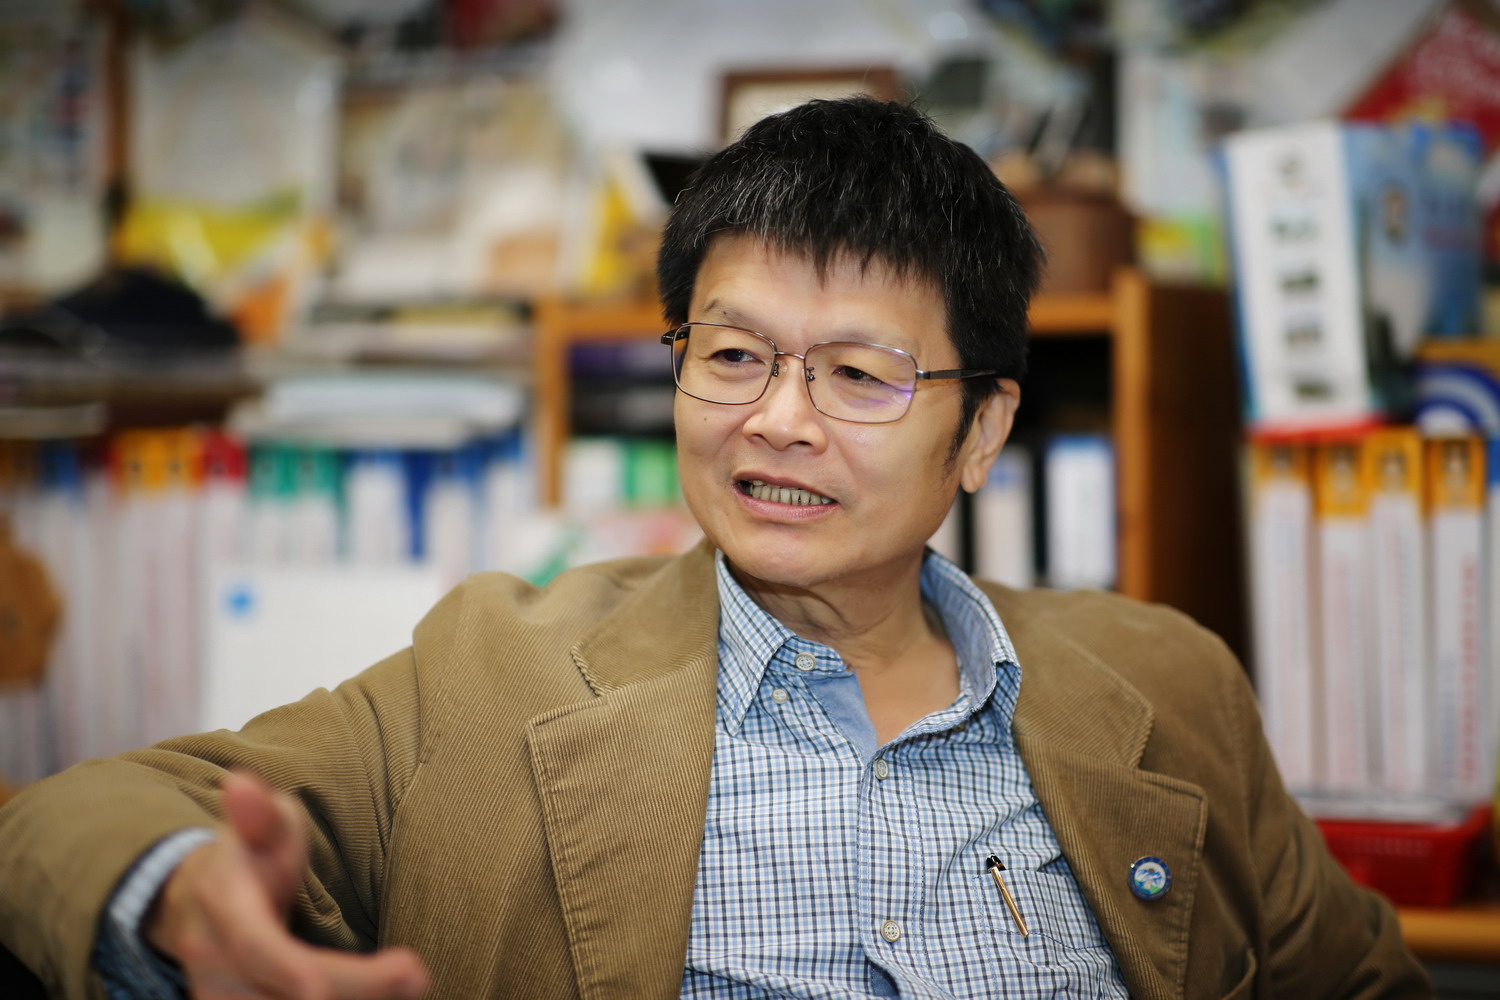 Prof. Han-Chien Lin of the NCYU Department of Wood Based Materials and Design, elected as the 8th President of NCYU, will assume the post in next February.